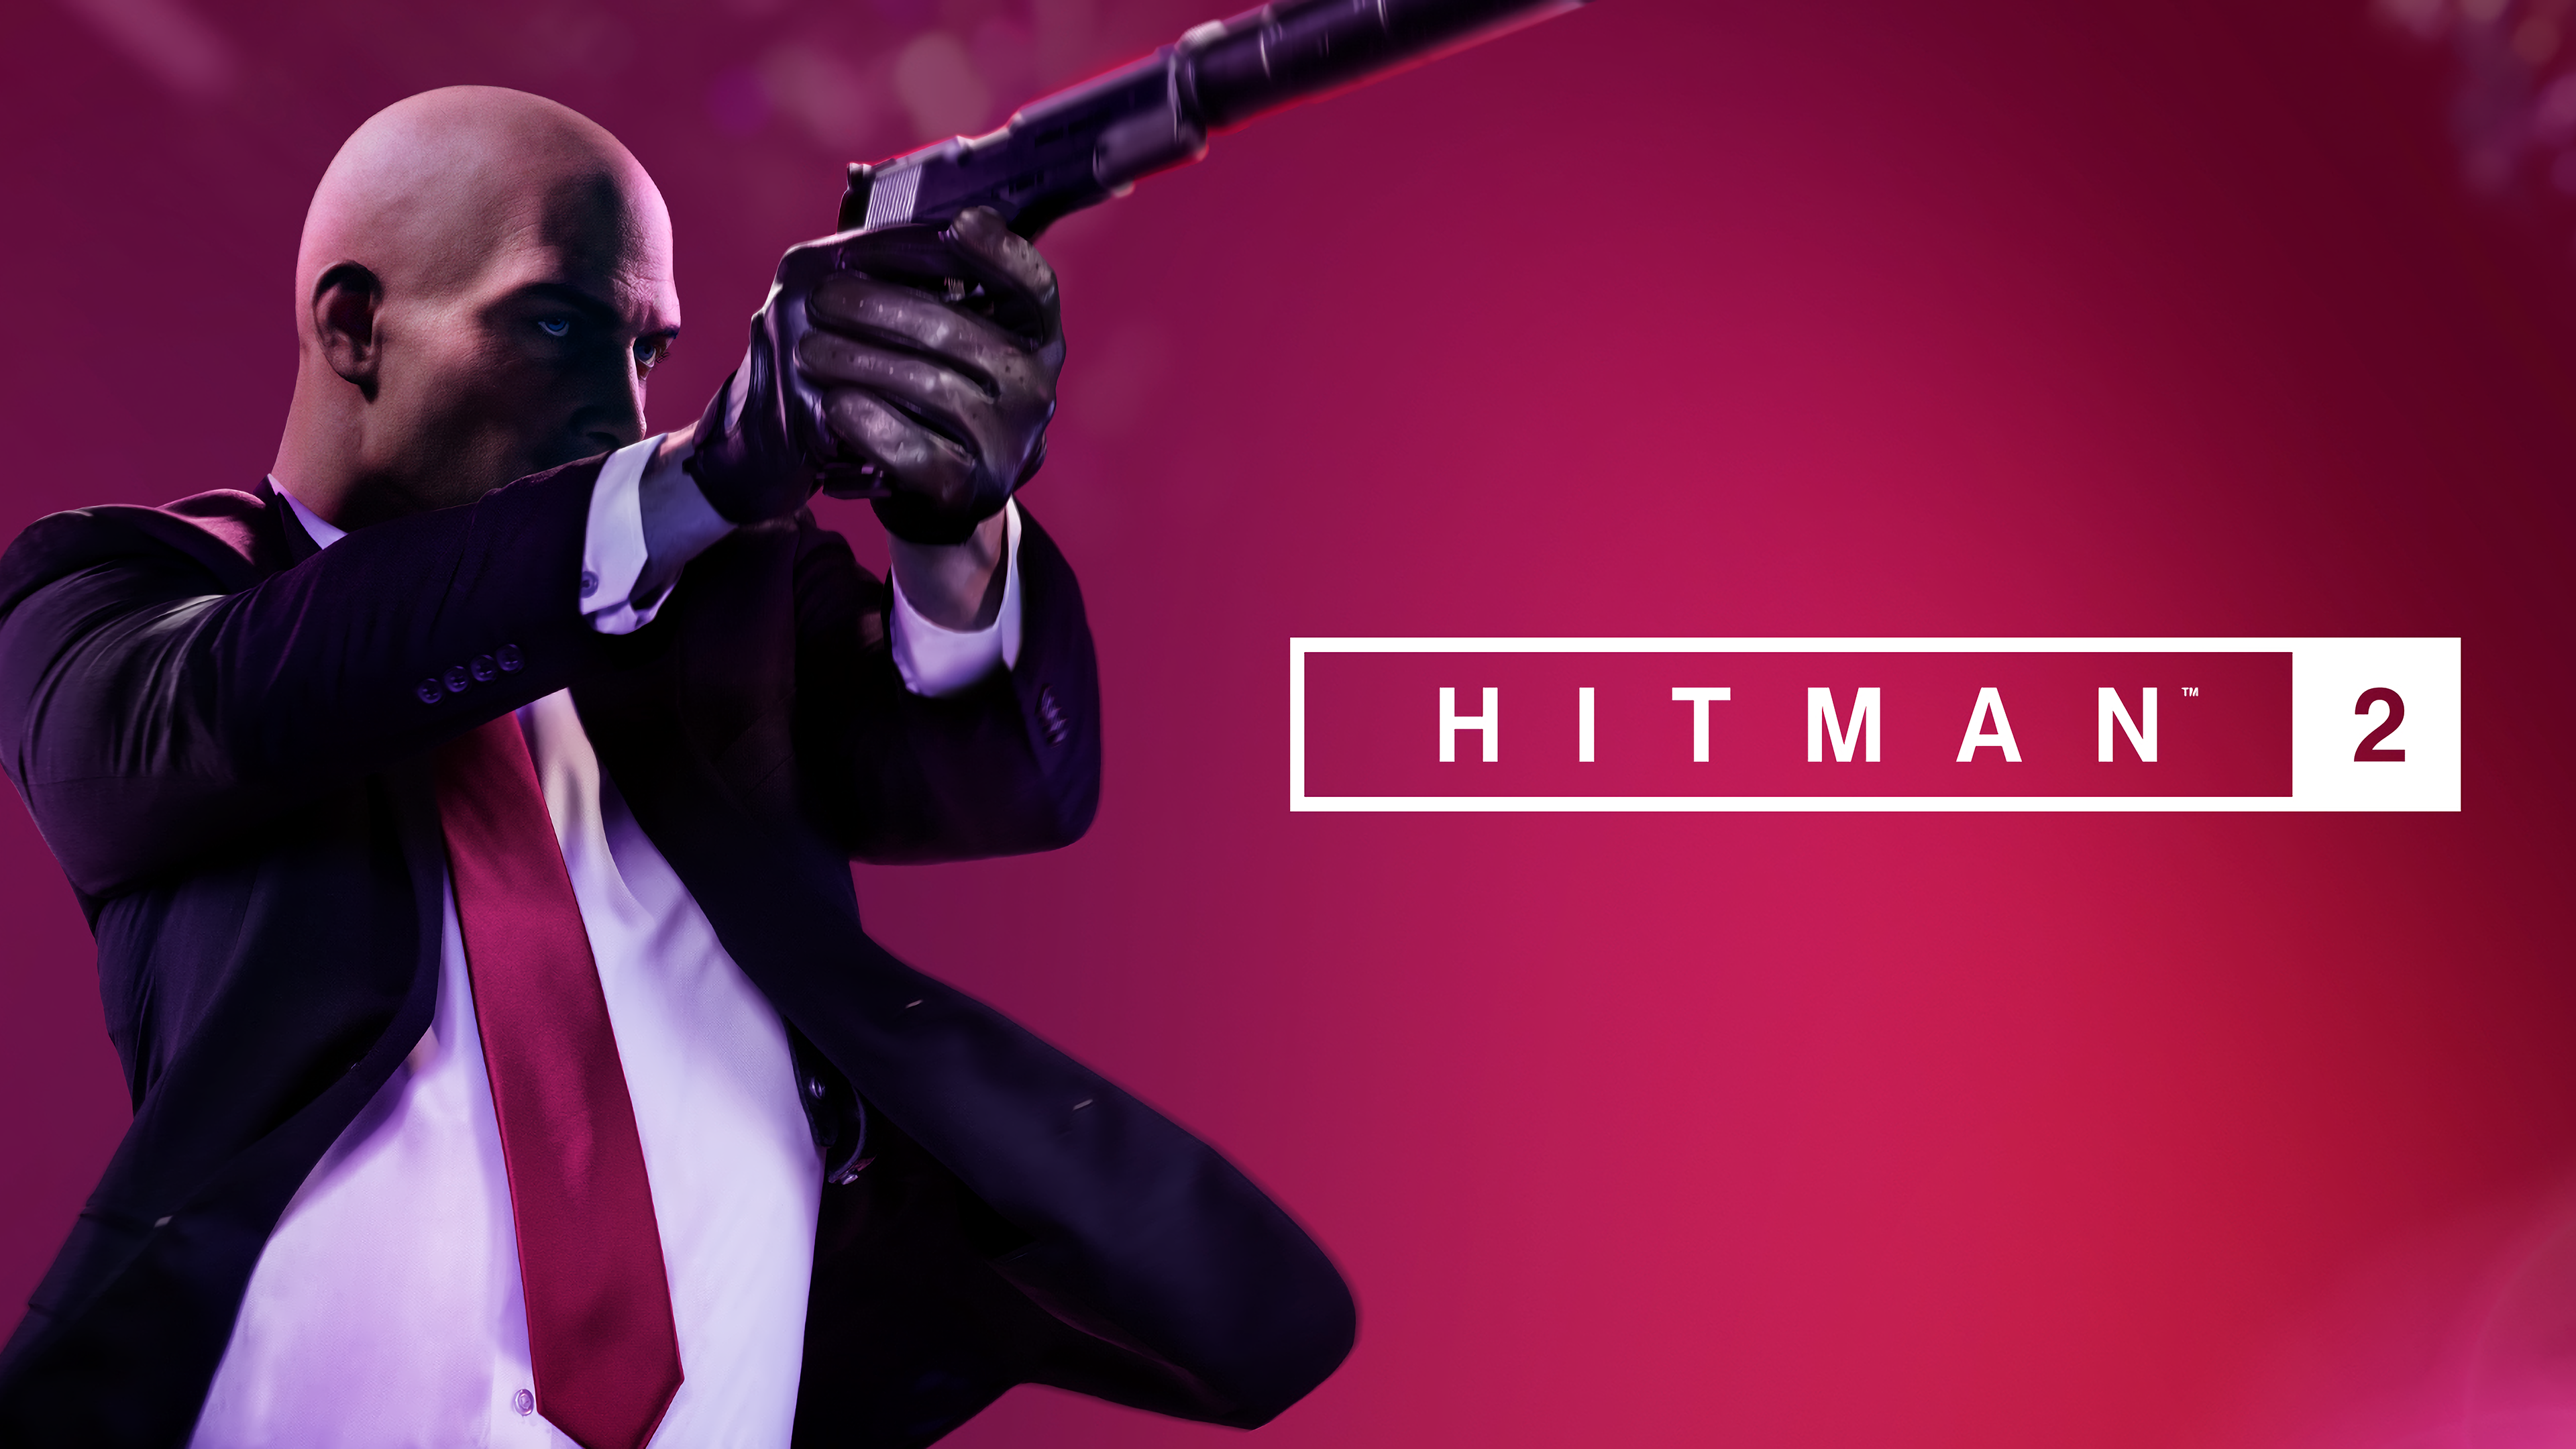 Per request heres hitman wallpapers too resolutions with and wo logo rhitman